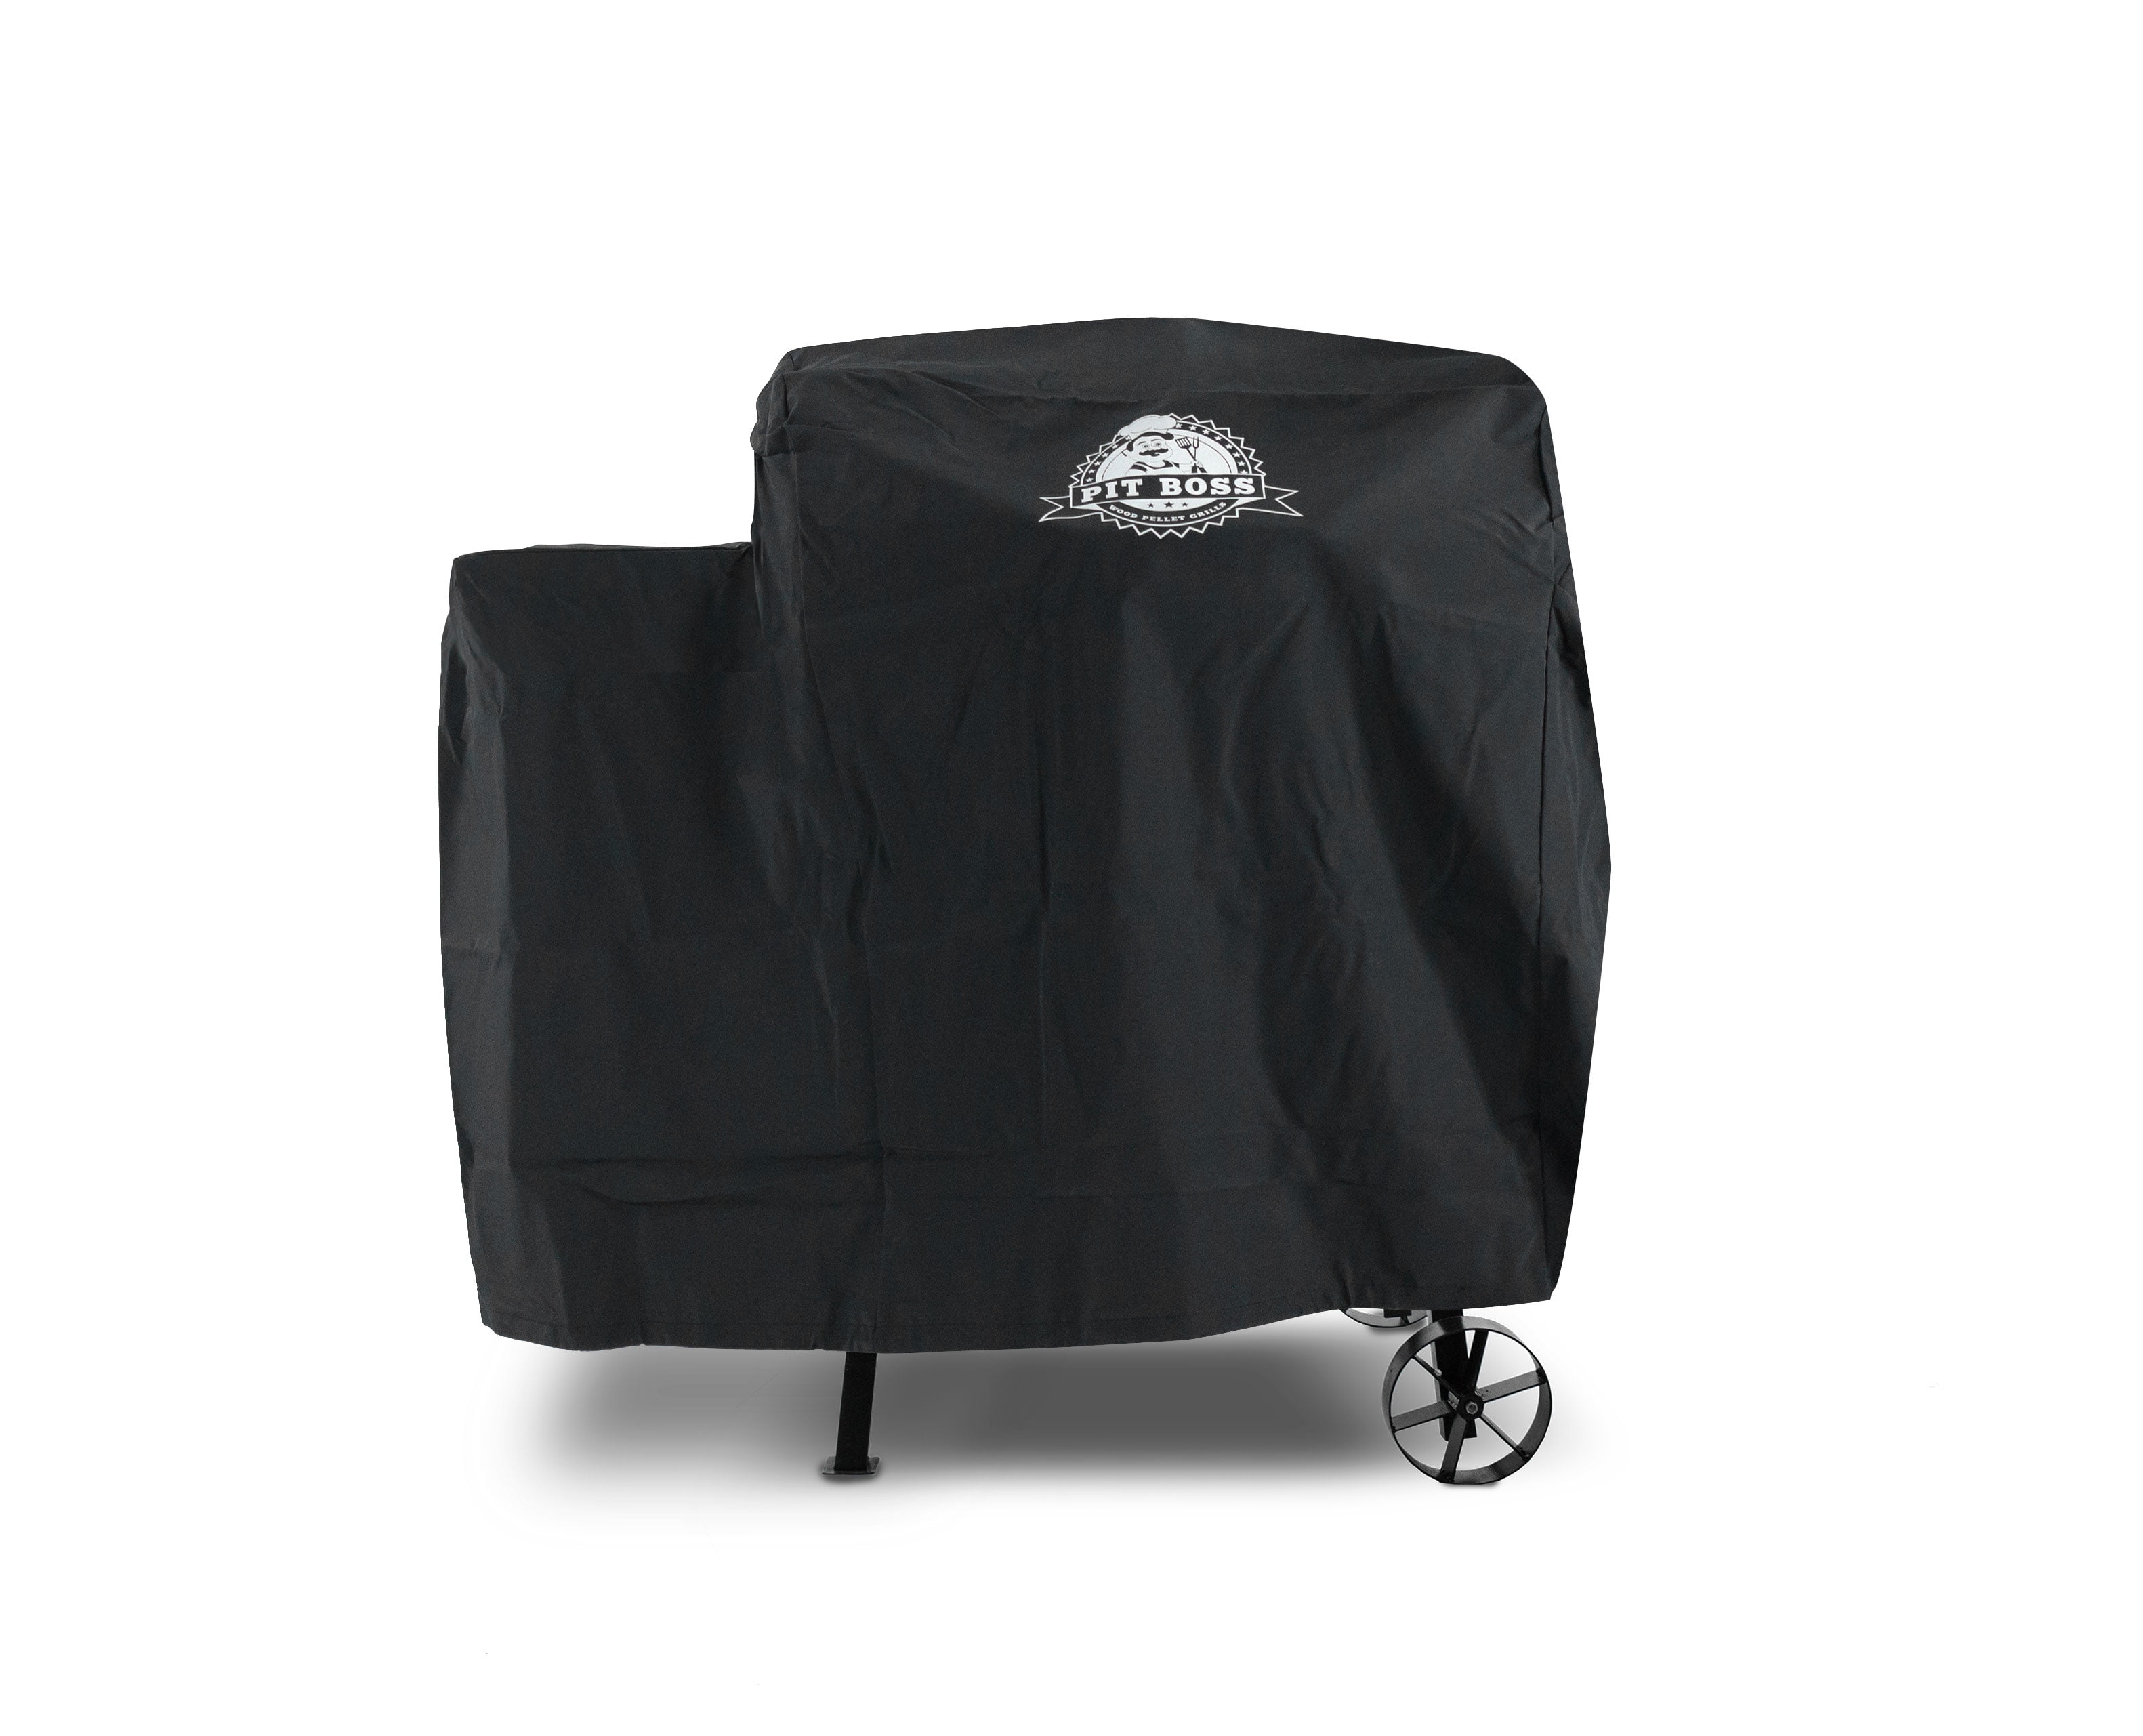 Pit Boss 340 Grill Cover Black, Durable 